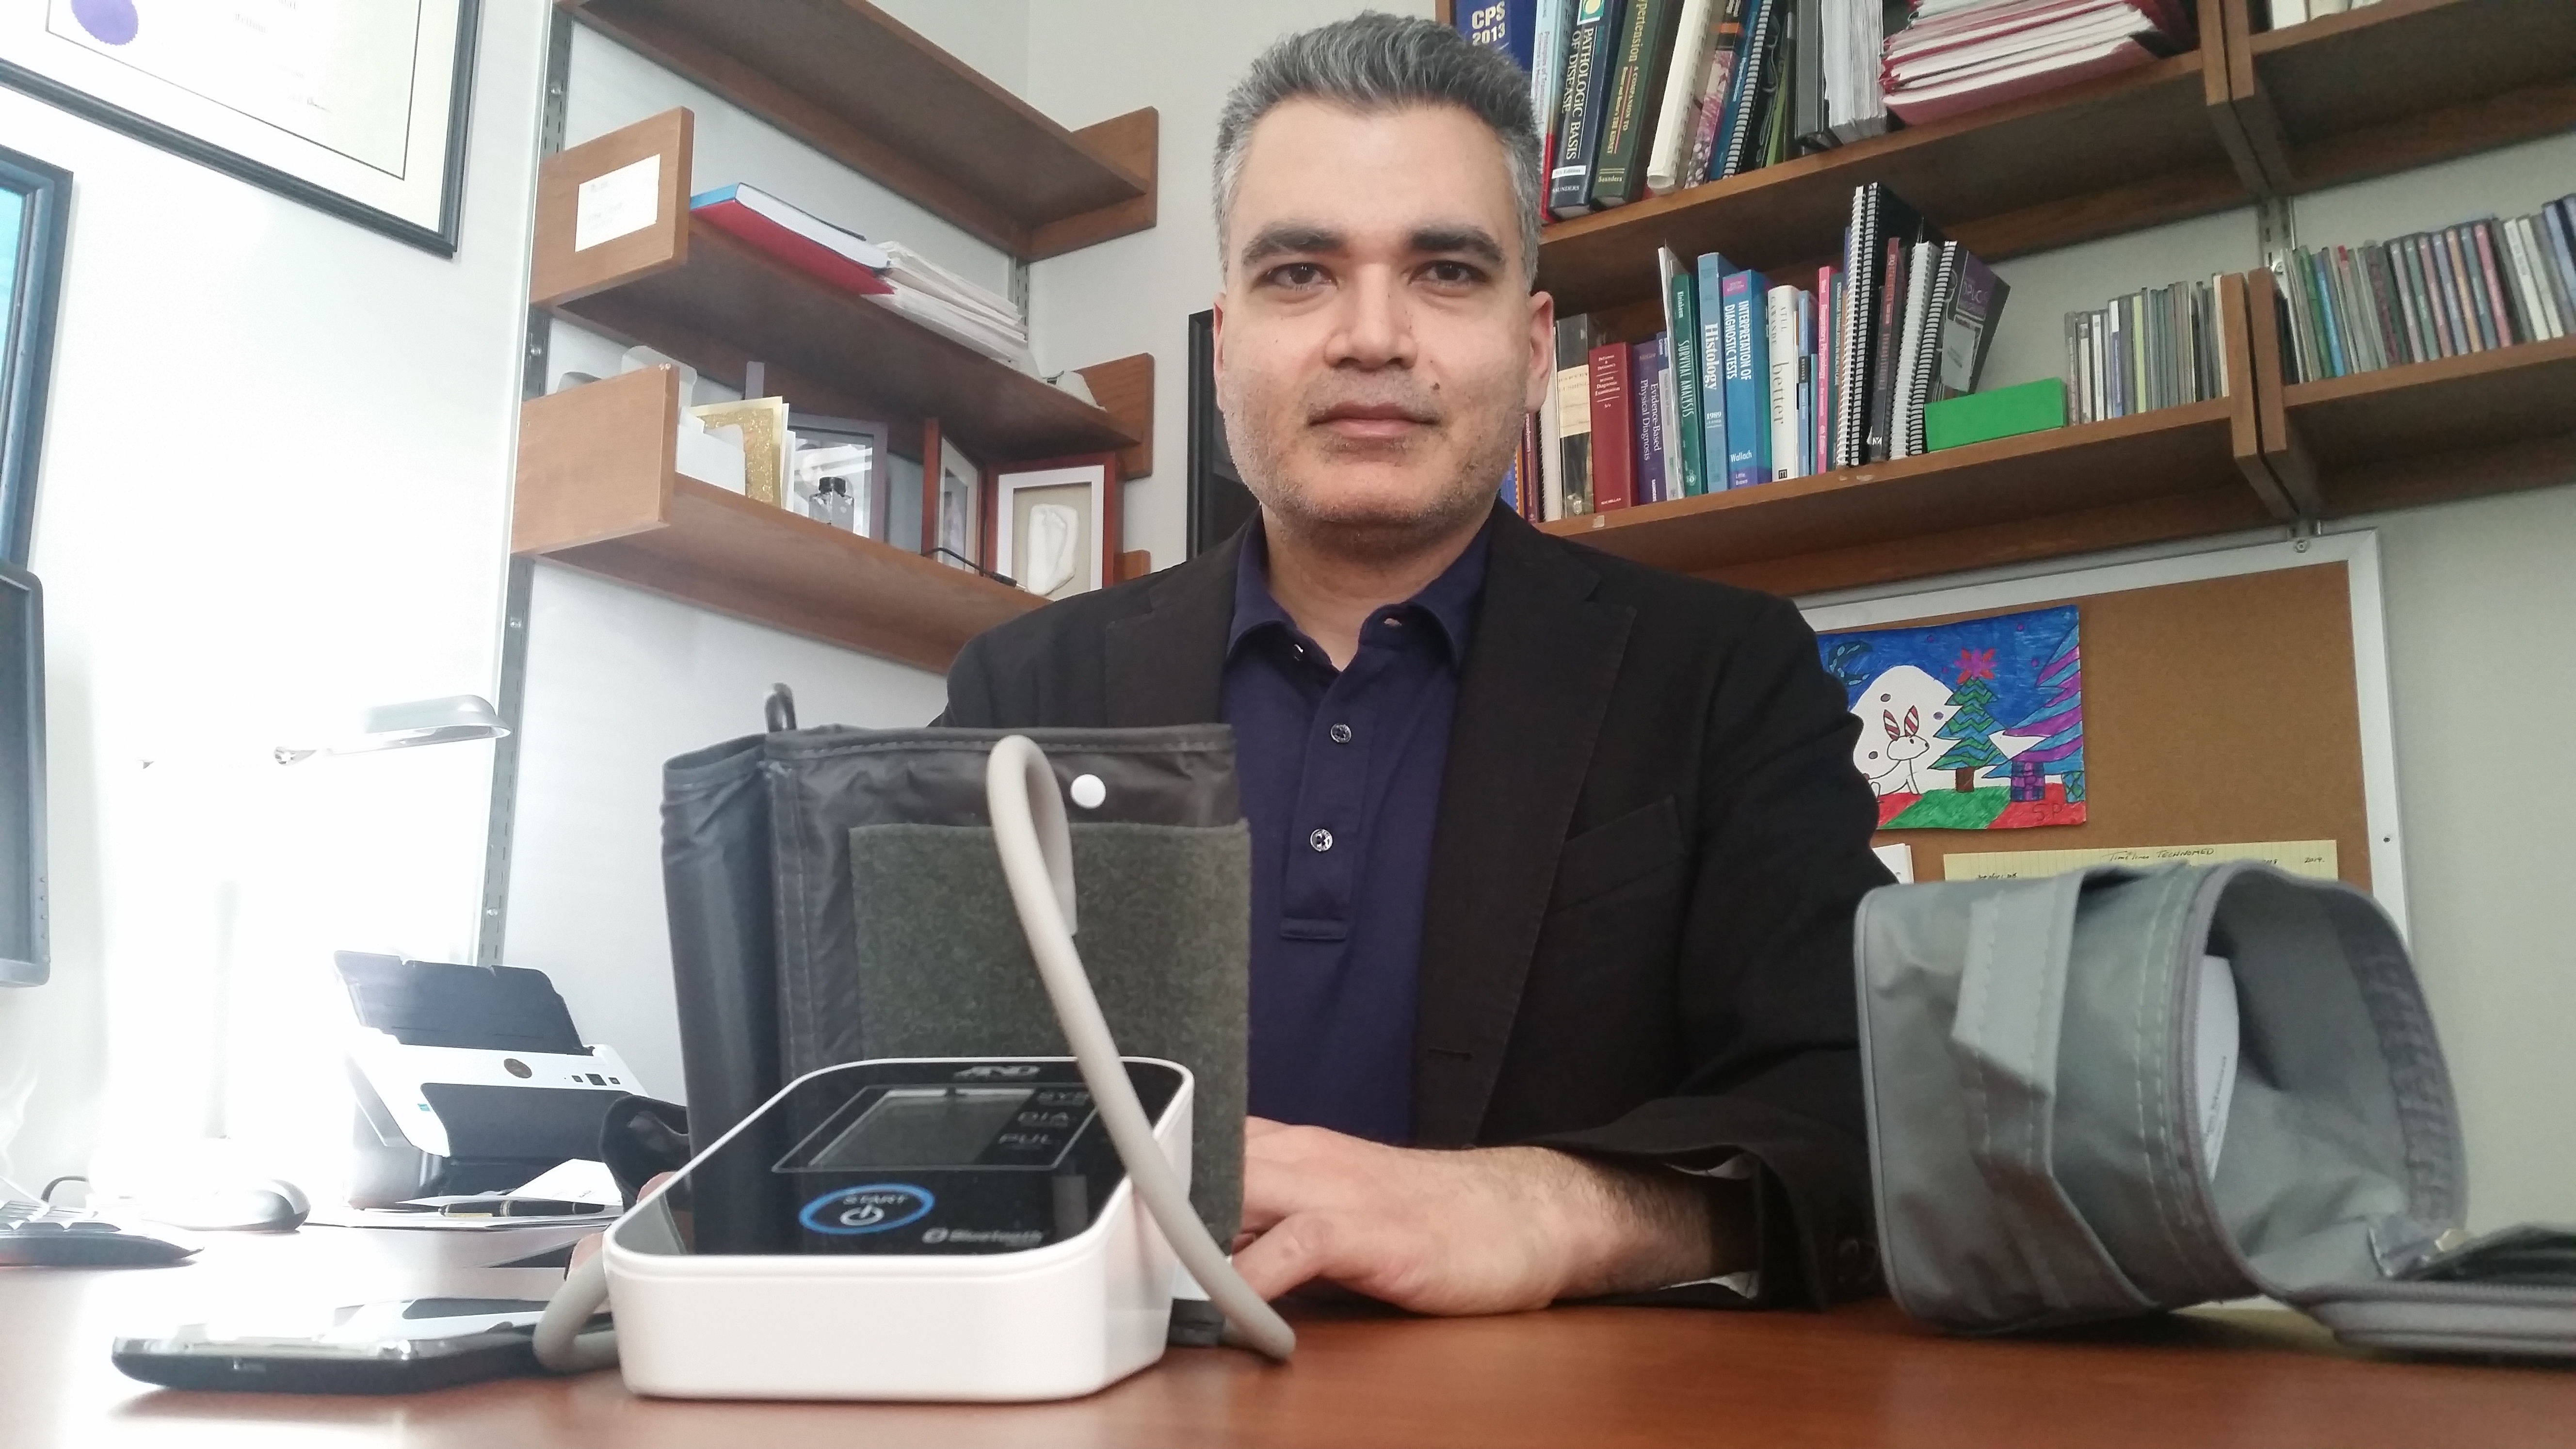 Raj Padwal of the Faculty of Medicine & Dentistry's Division of General Internal Medicine shows equipment to be used for home-based blood pressure monitoring.